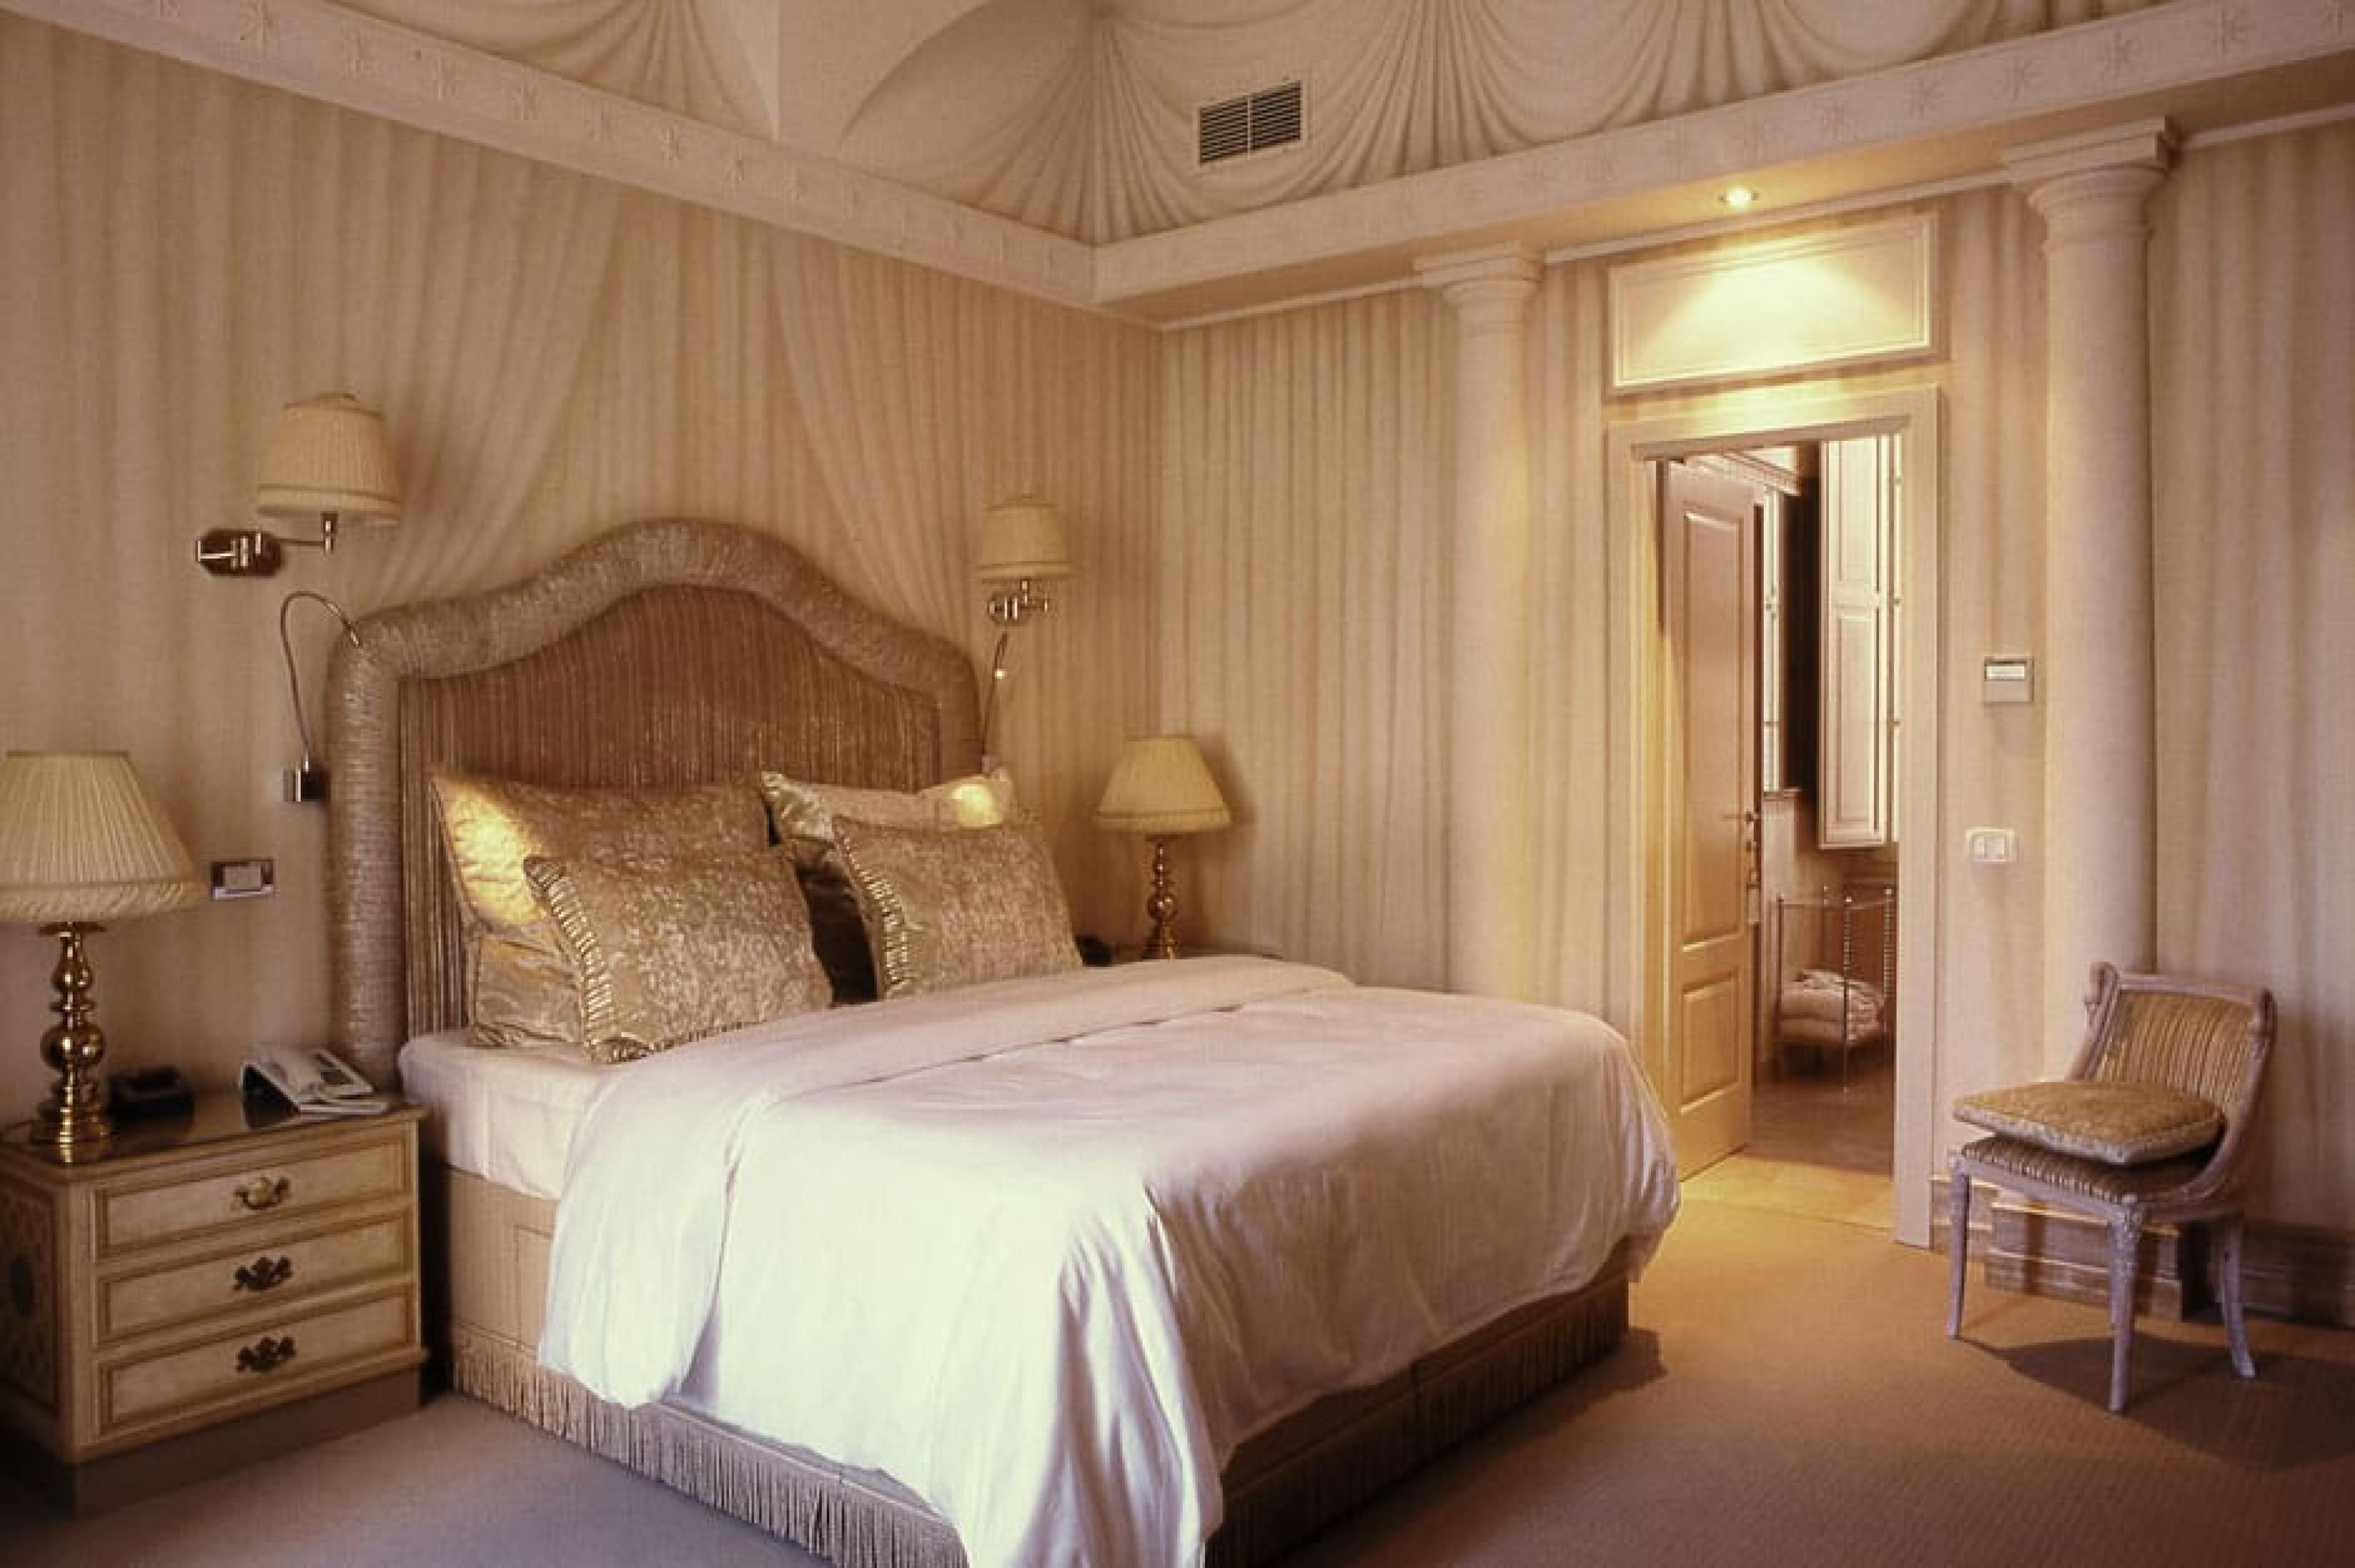 Suite at  Il Palazzetto, Rome, Italy